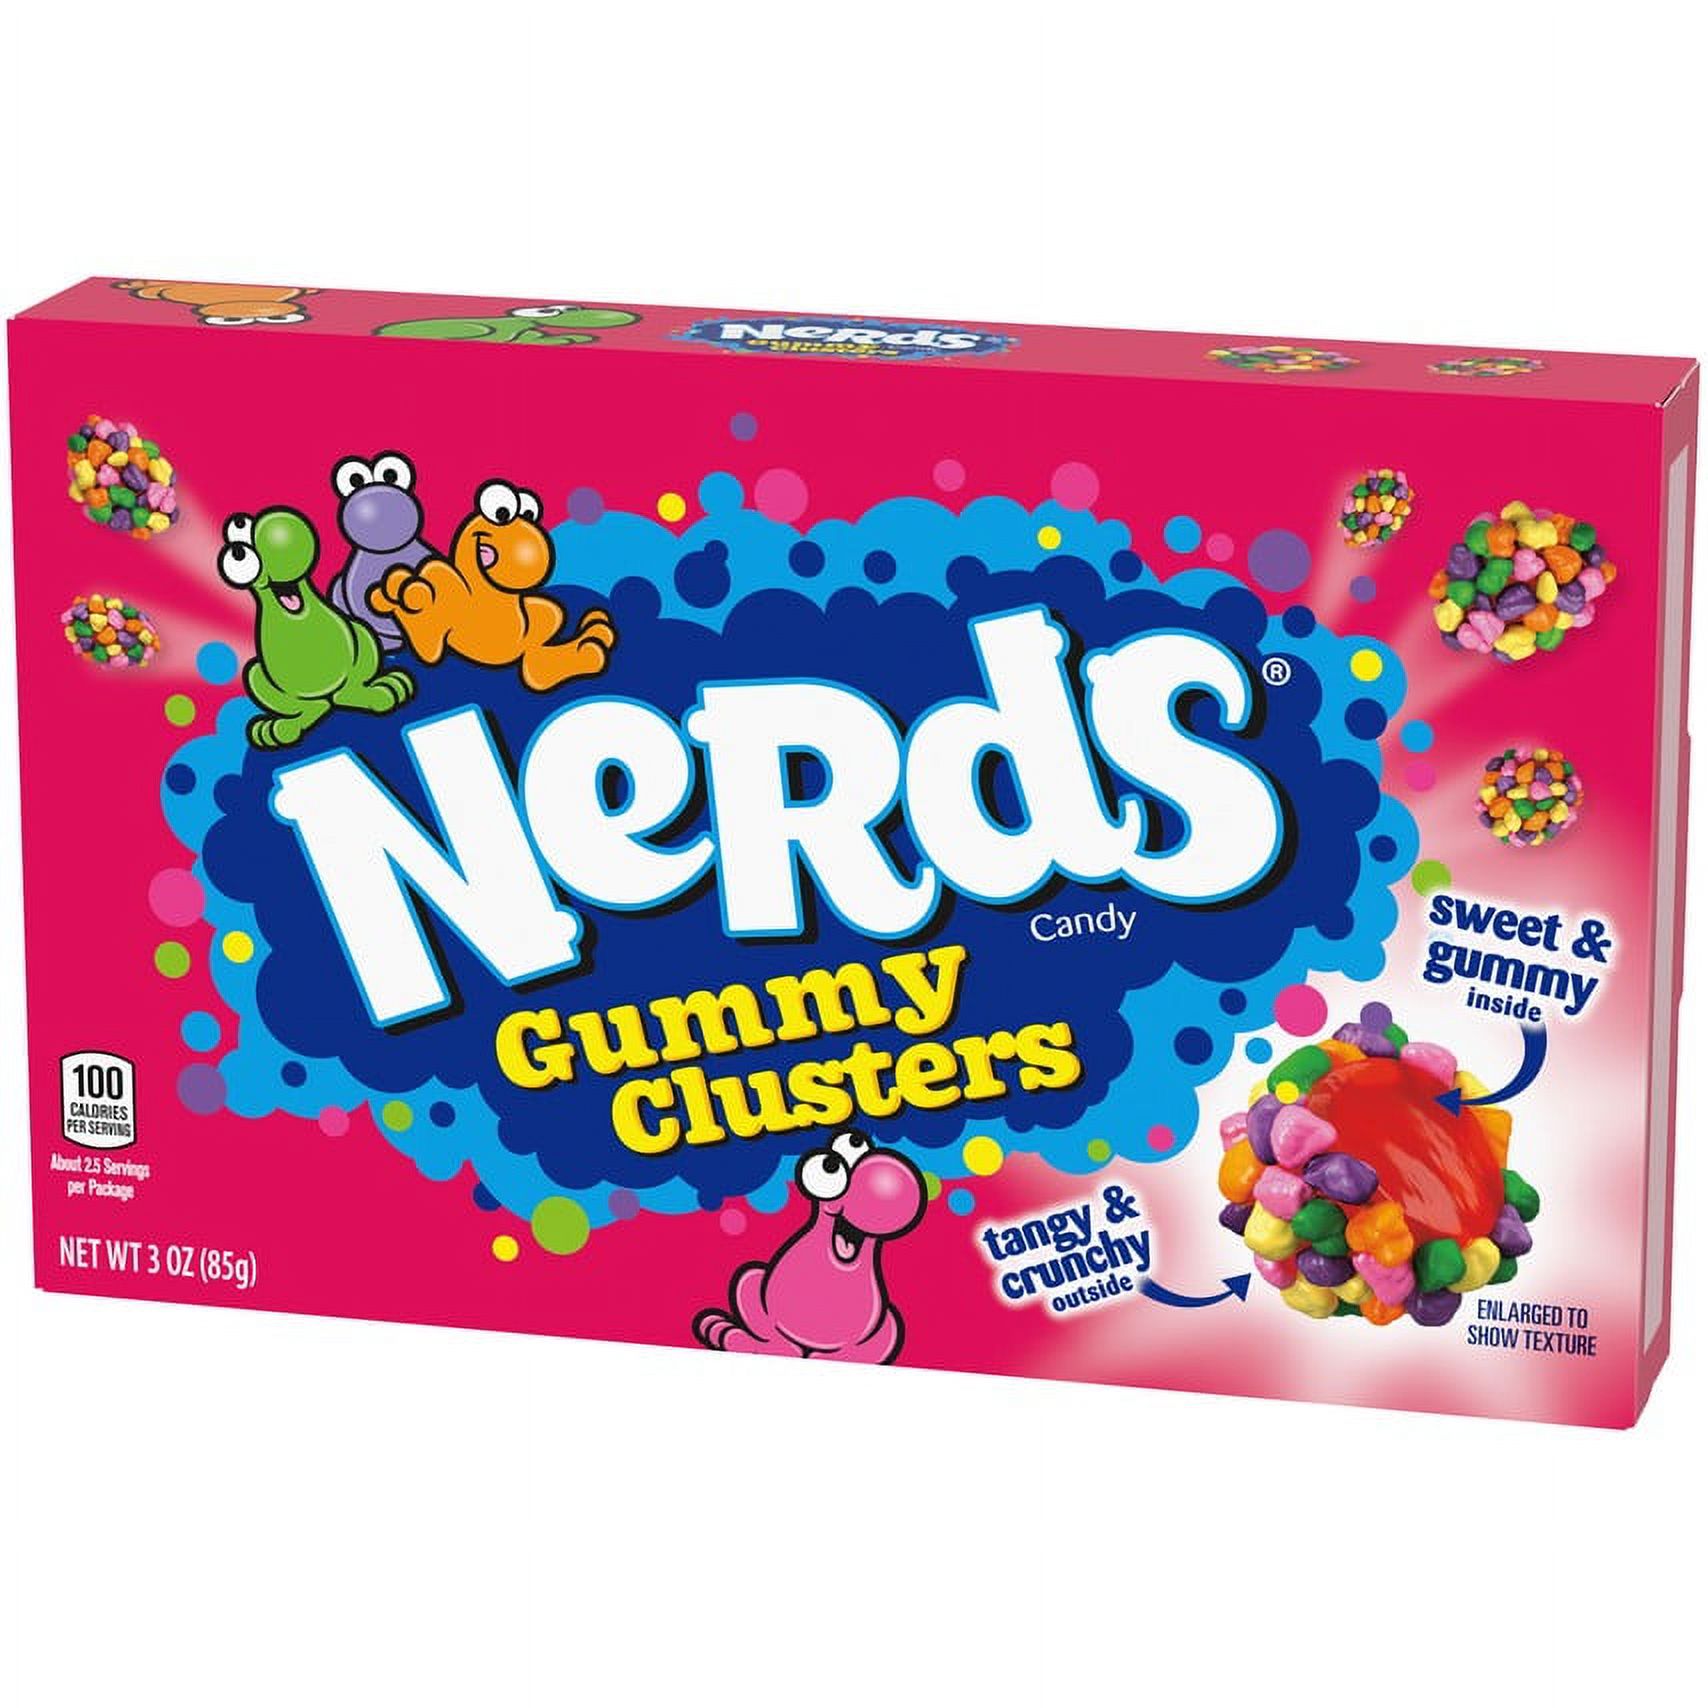 Nerds Gummy Clusters Candy, Rainbow, 3 oz Theater Box - image 3 of 9